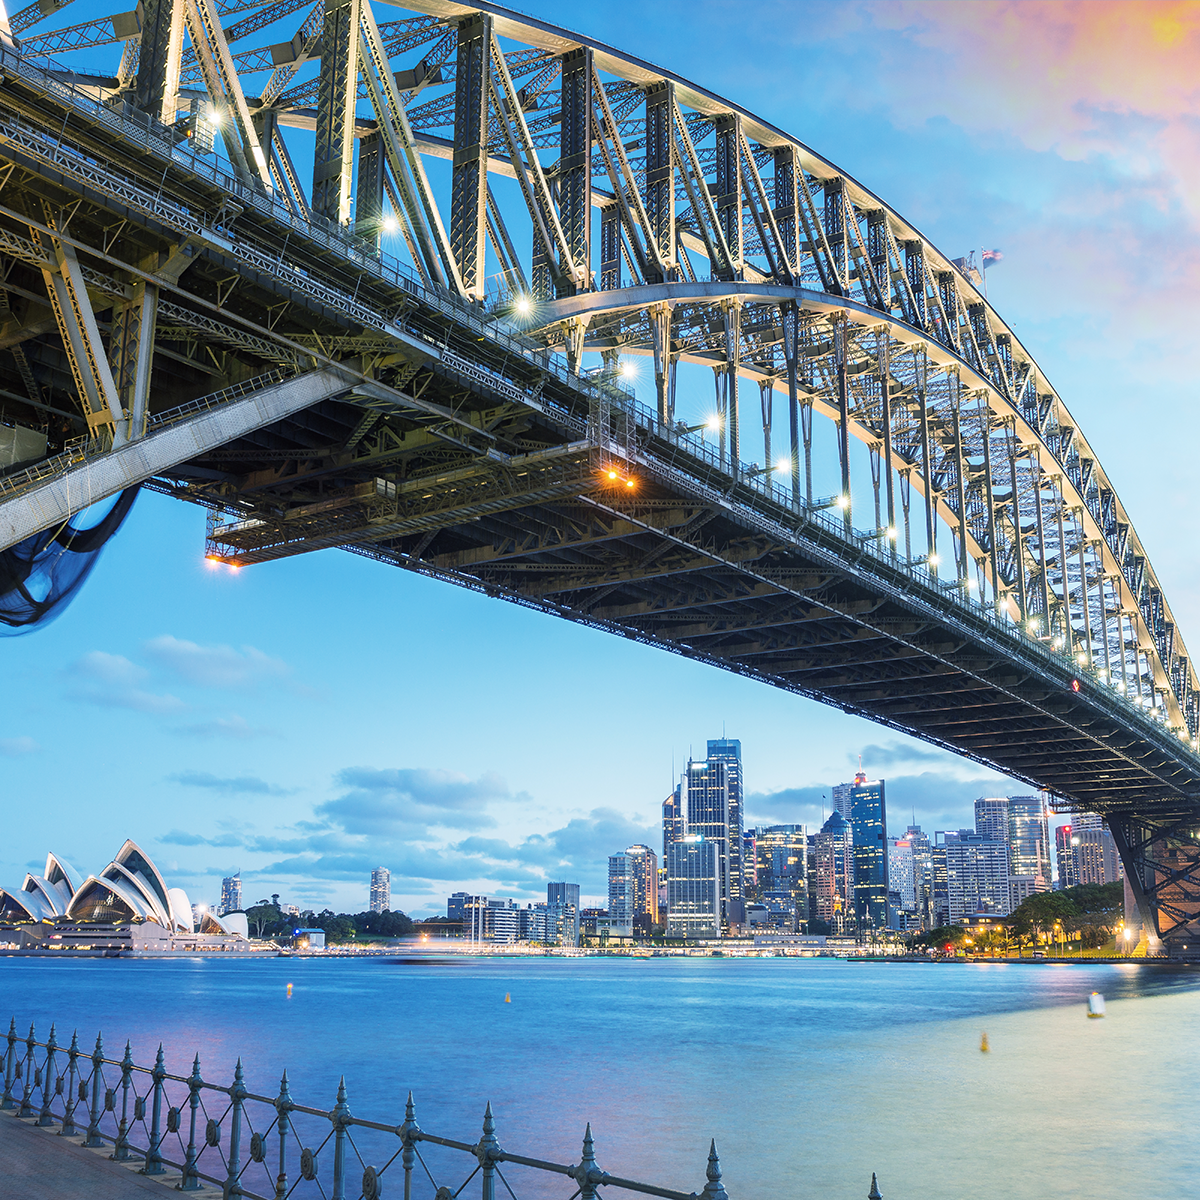 Relocating to Australia? Update from our Foreign Exchange Partner - Halo Financial